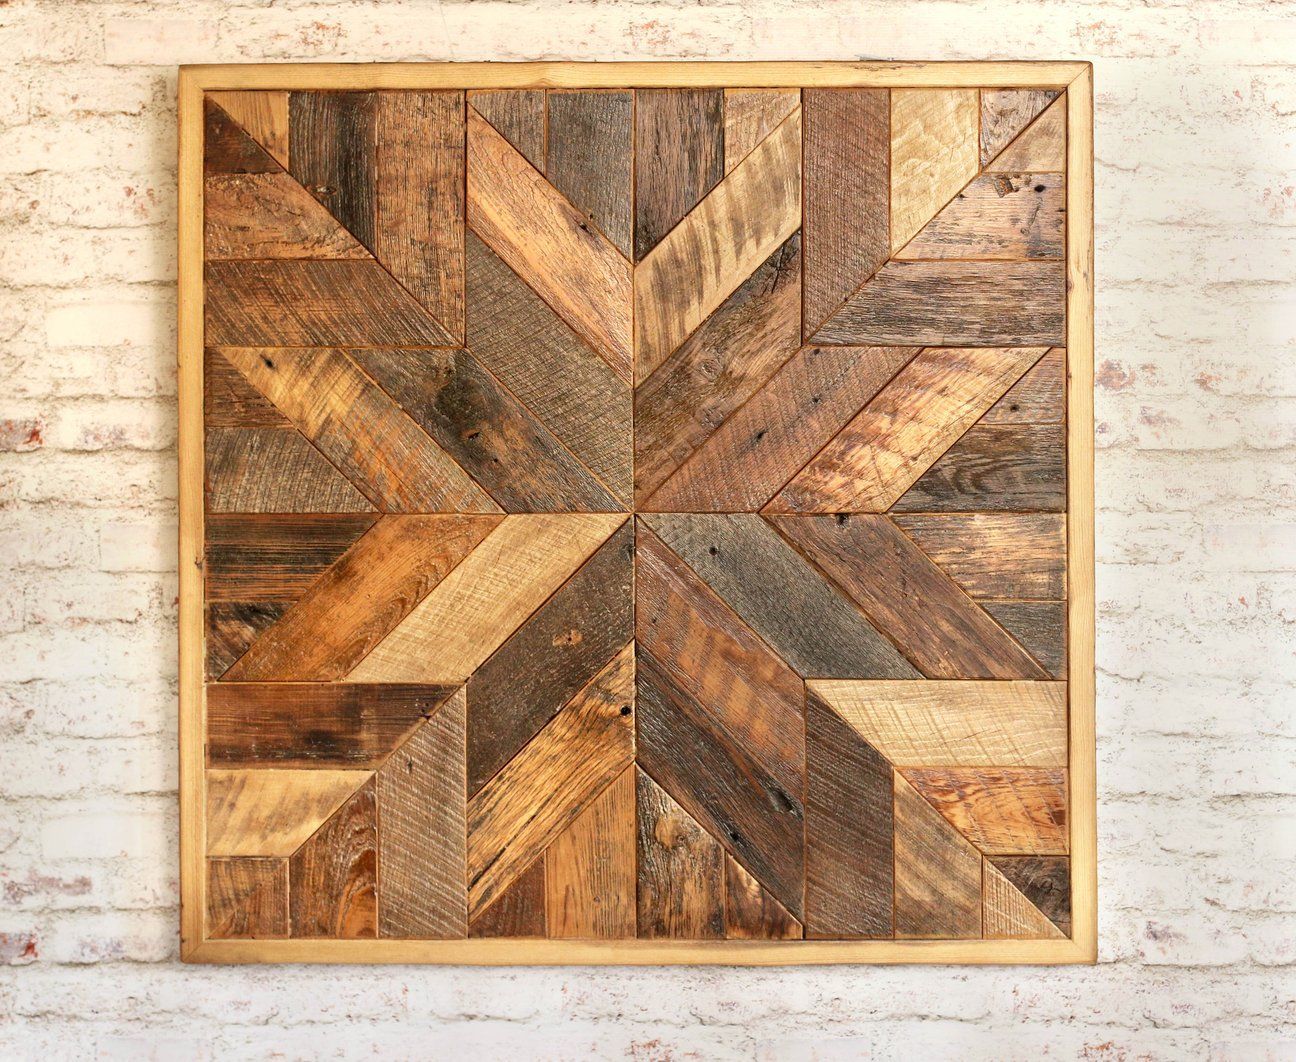 Reclaimed Wood Quilt Square (26 Inches) | Wooden Wall Decor, Reclaimed Pertaining To Most Current Square Wall Art (View 3 of 20)